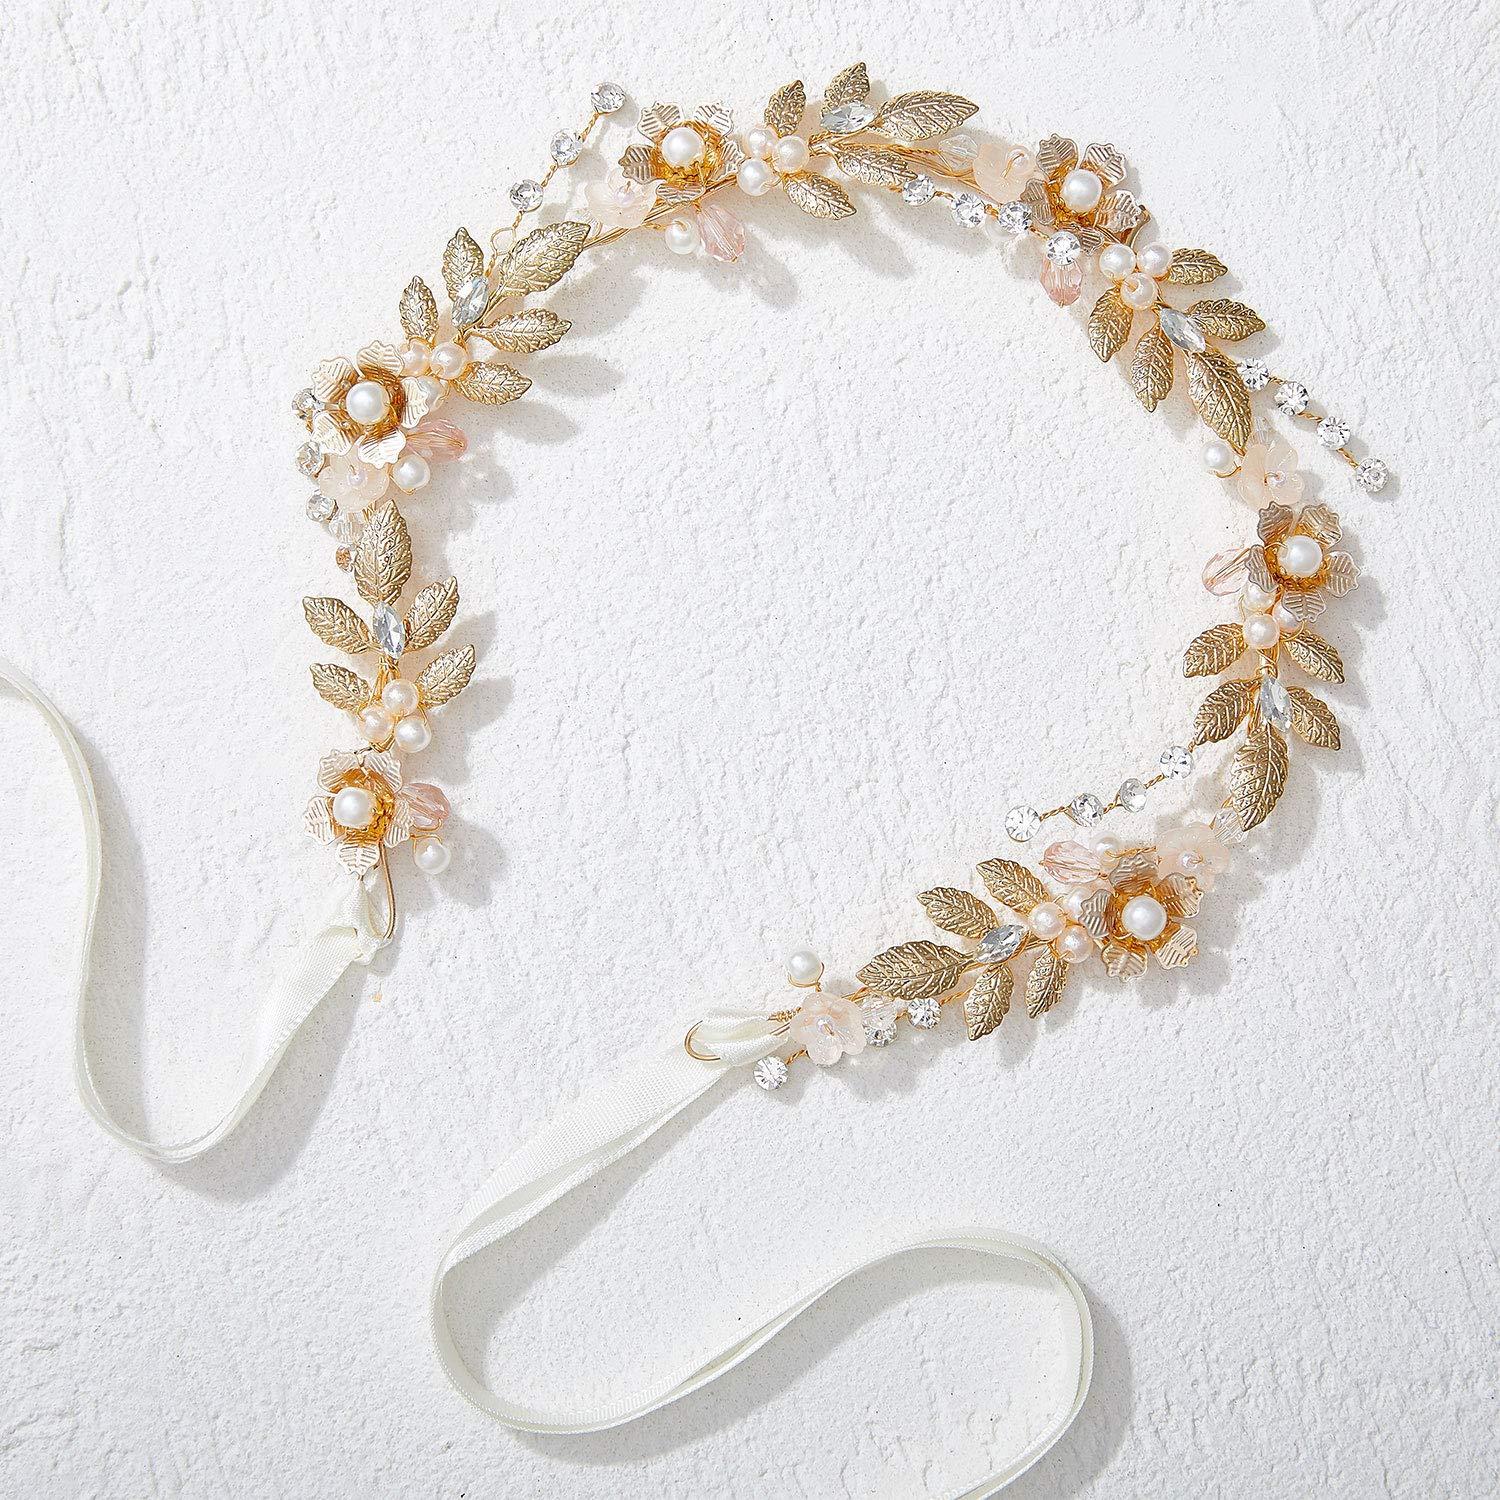 Flower Girl Jewelry with Ivory Pearls and Crystal Flowers